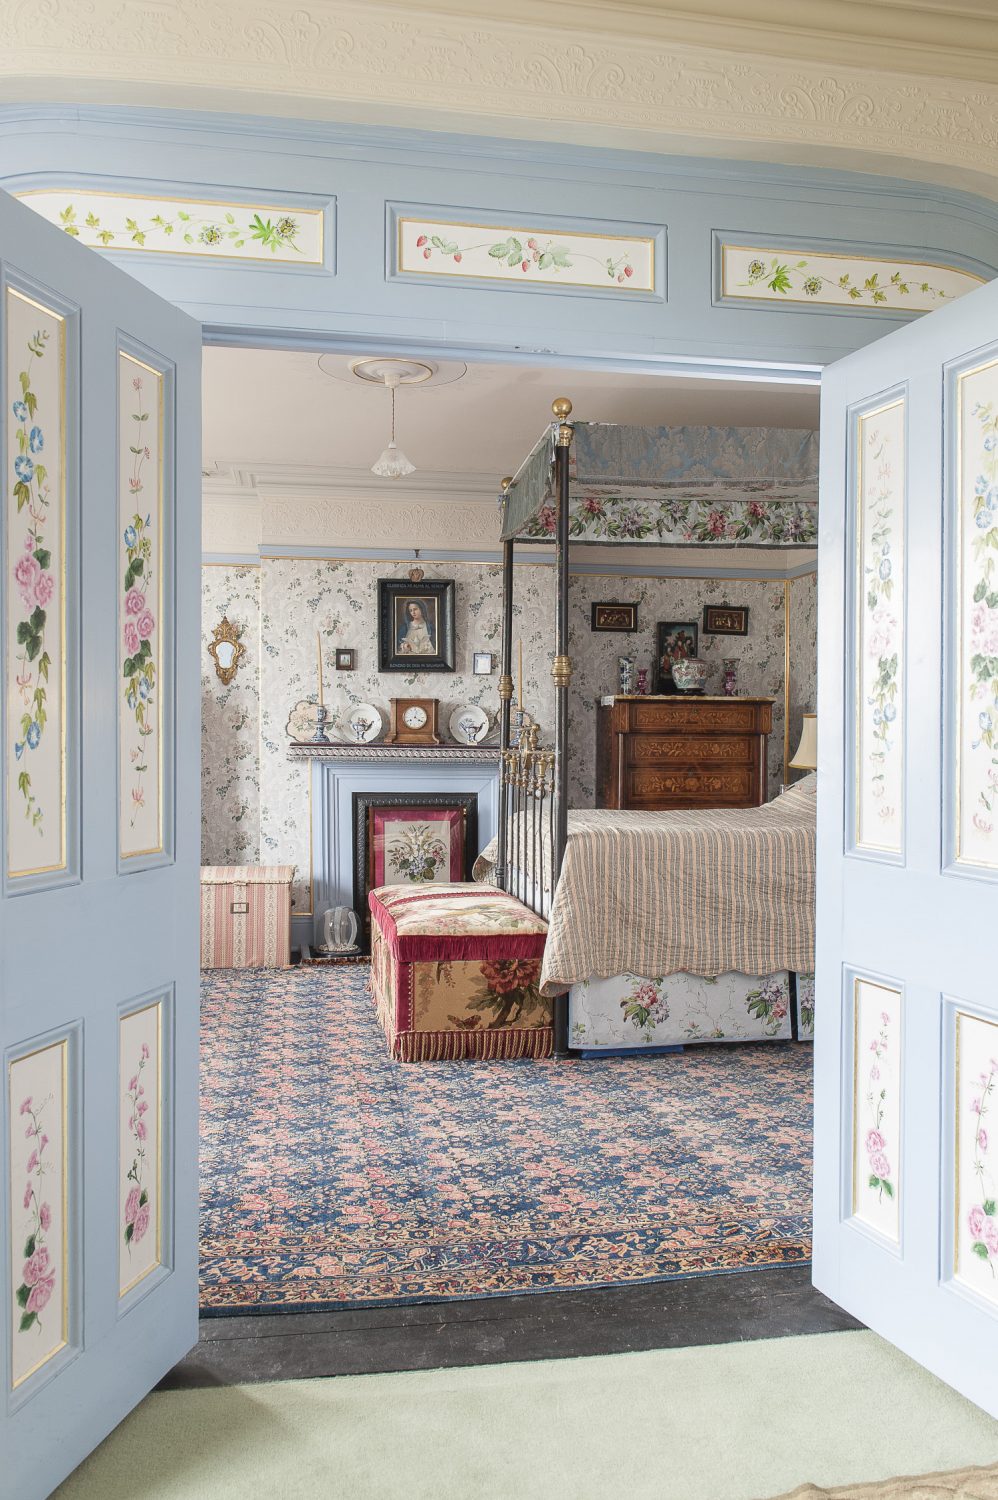 Mr Parry’s Room features a magnificent four poster bed, lined with the prettiest chintz, from which you could sit and look out at a particularly special sea view